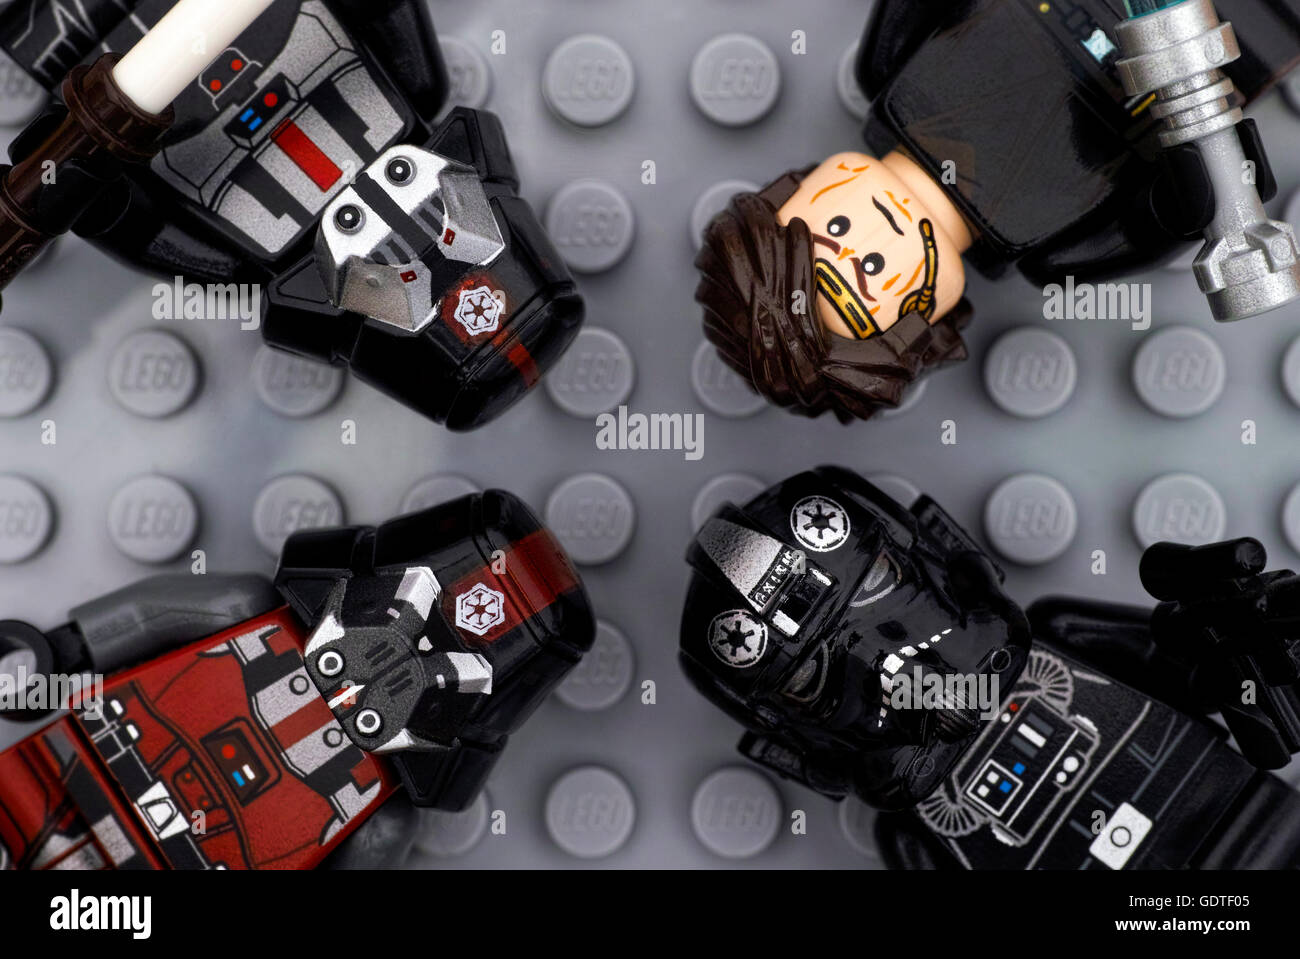 Four Lego Star Wars minifigures - Anakin Skywalker, TIE Pilot, black and red Sith troopers - on Lego gray baseplate background Stock Photo